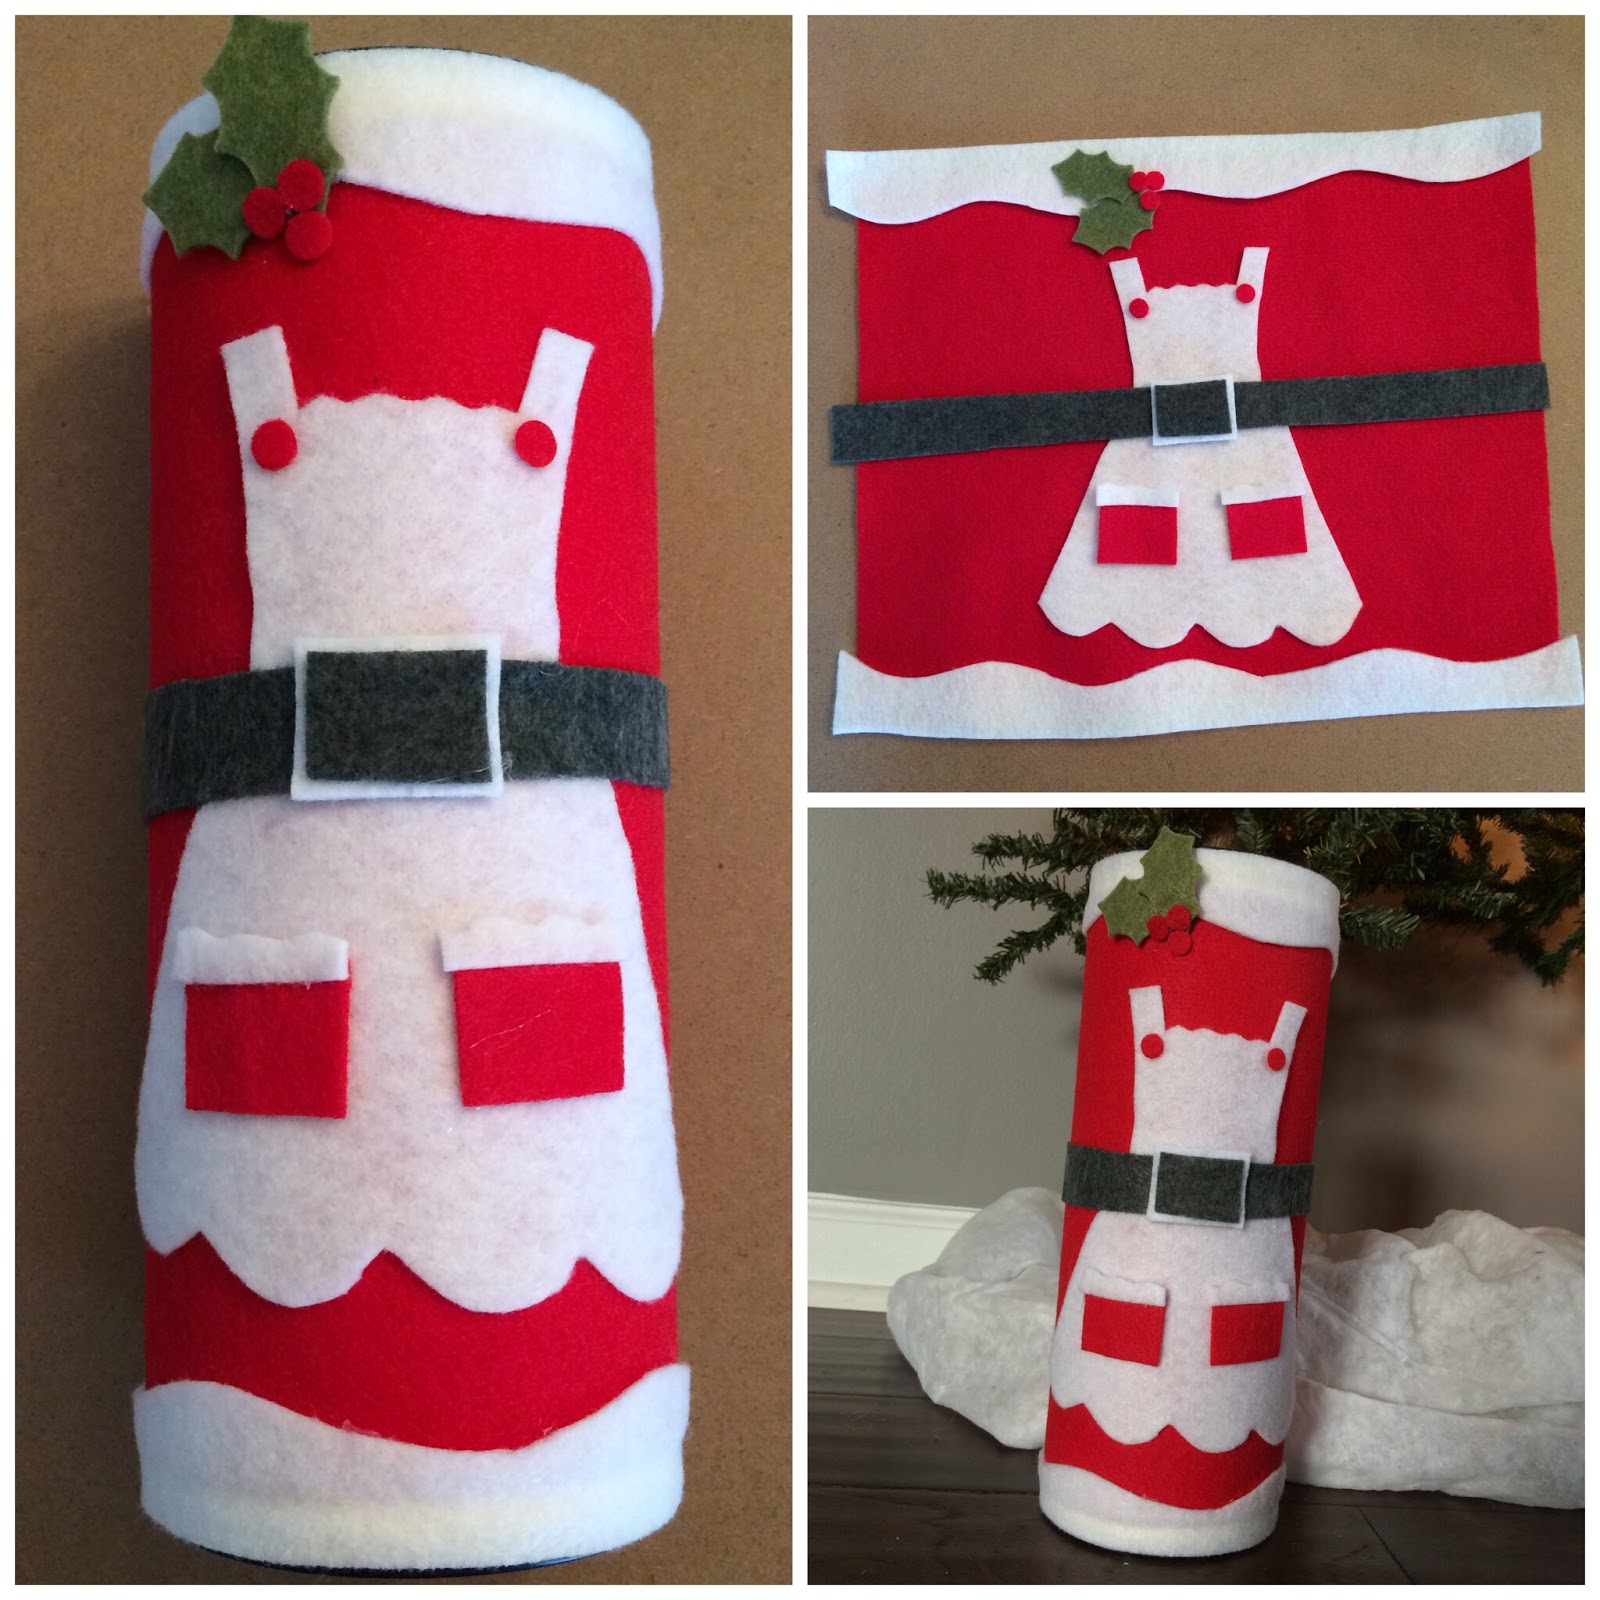 DIY Holiday Money MRS. CLAUS Bank - An Upcycle Project, Felt Craft - LeroyLime